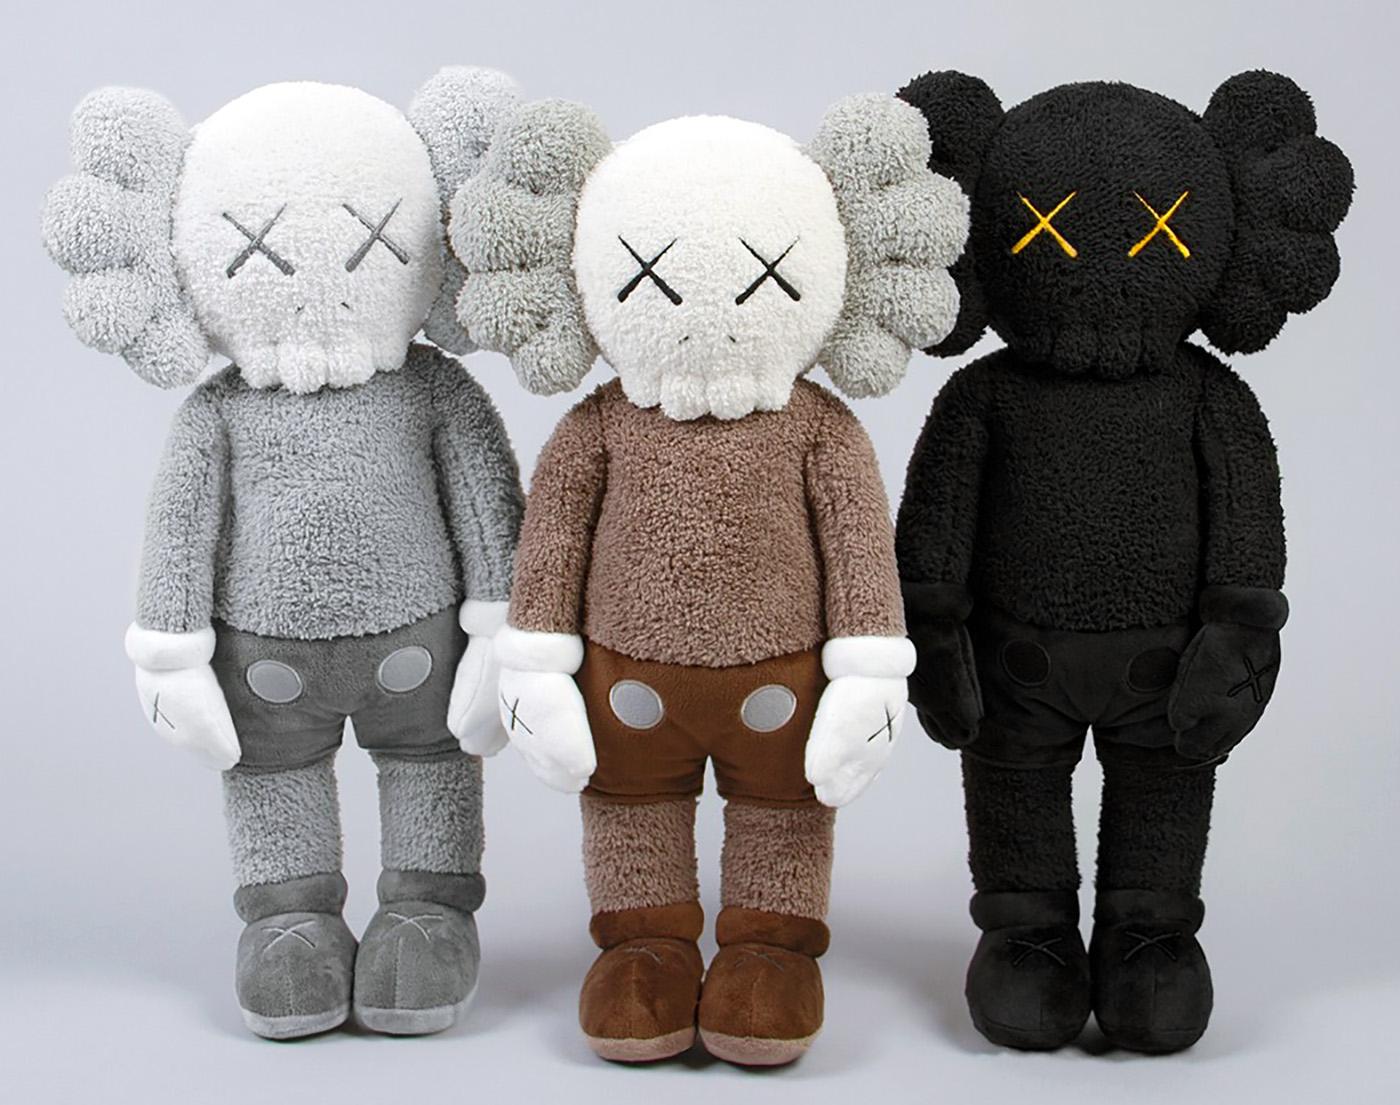 KAWS Plush Holiday Companion Set of 3: 
These 20" figurines were published to commemorate the debut of KAWS’ floating art piece in Hong Kong during Hong Kong Art Basel 2019. Each new with tags. A classic, limited standout KAWS Companion series. New